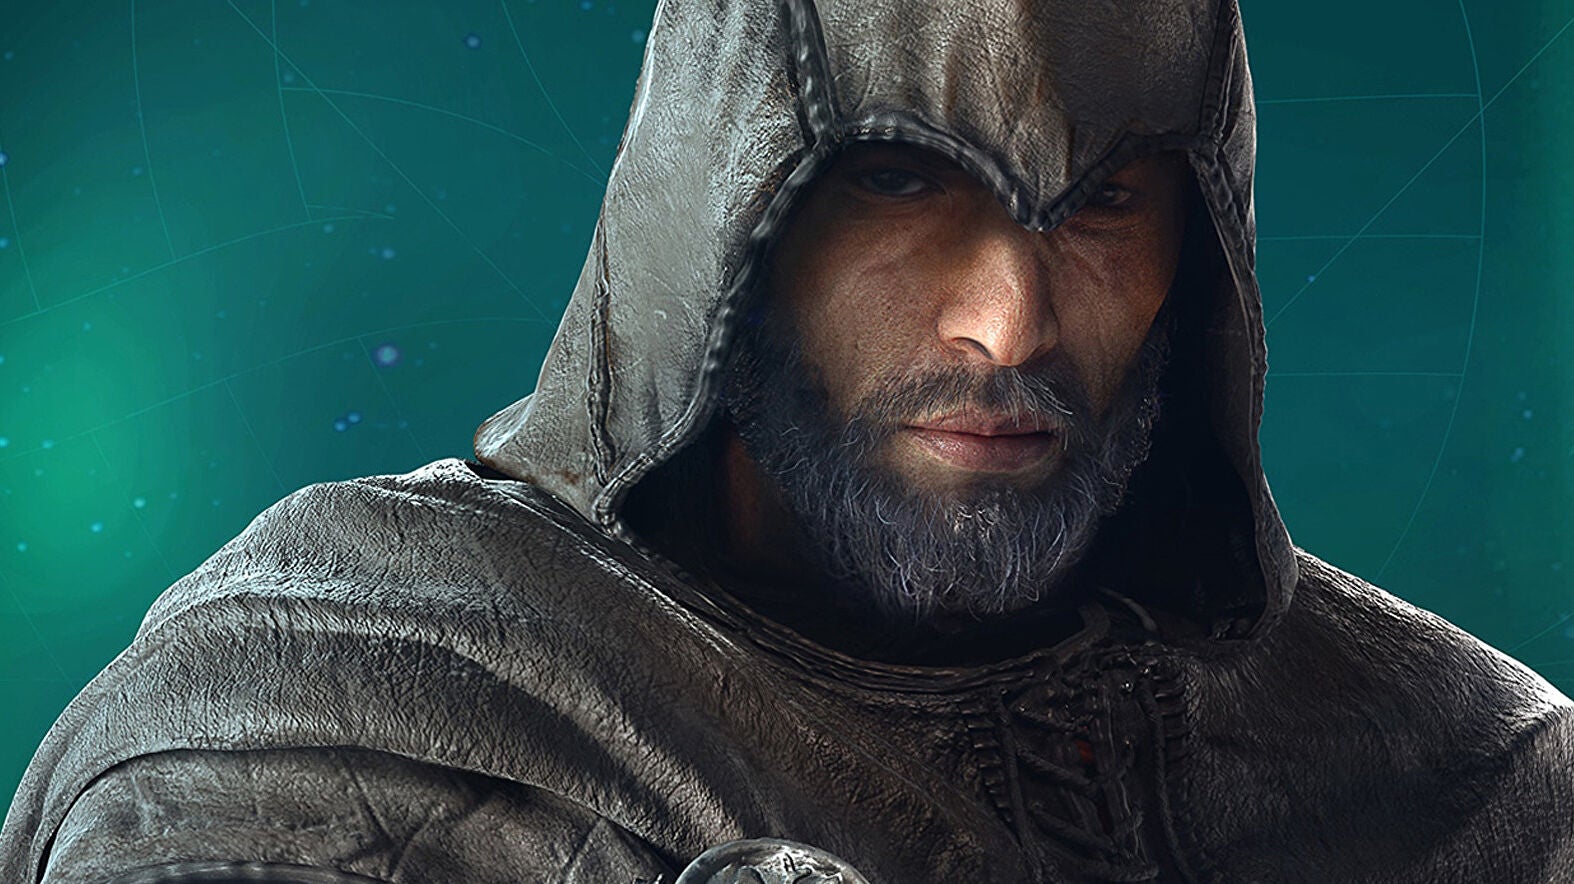 Assassin's Creed character Basim, who will return in Rift.